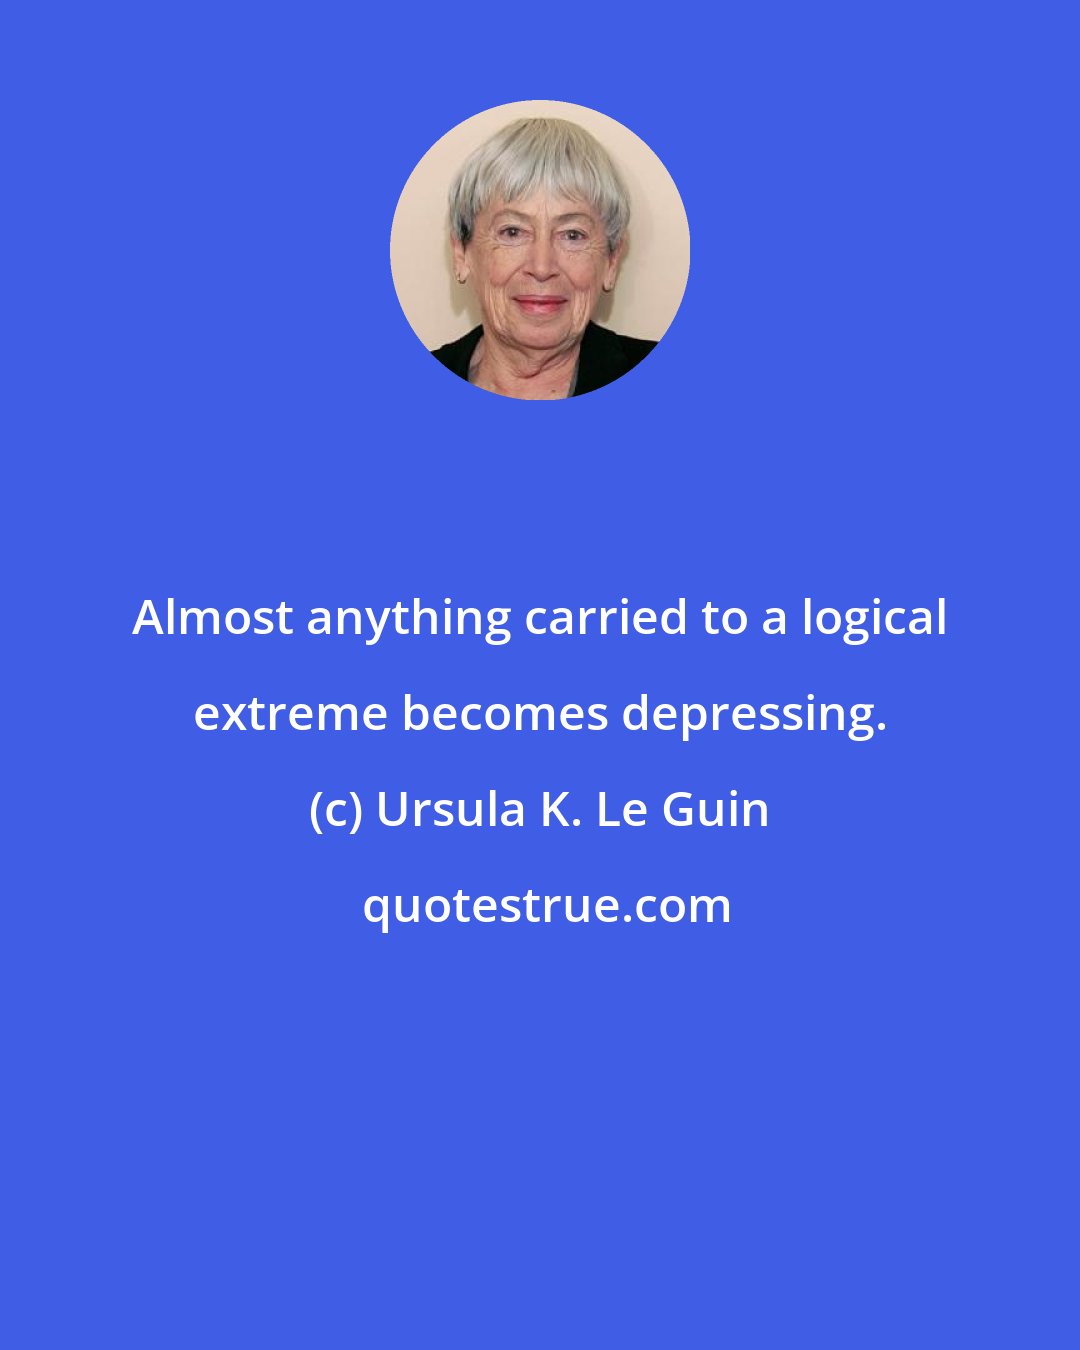 Ursula K. Le Guin: Almost anything carried to a logical extreme becomes depressing.